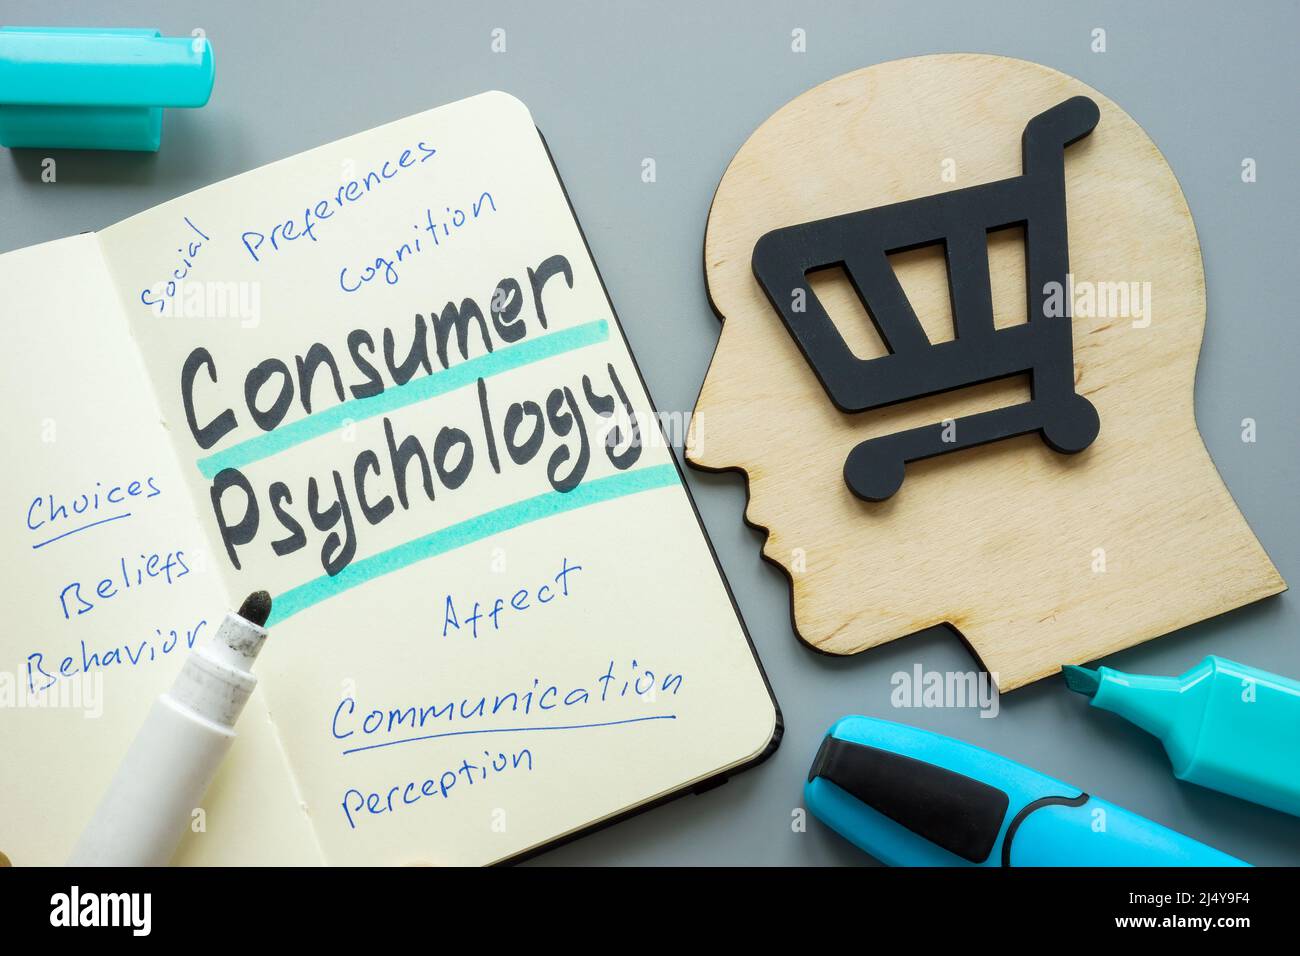 Consumer psychology notes and a shopping cart. Stock Photo